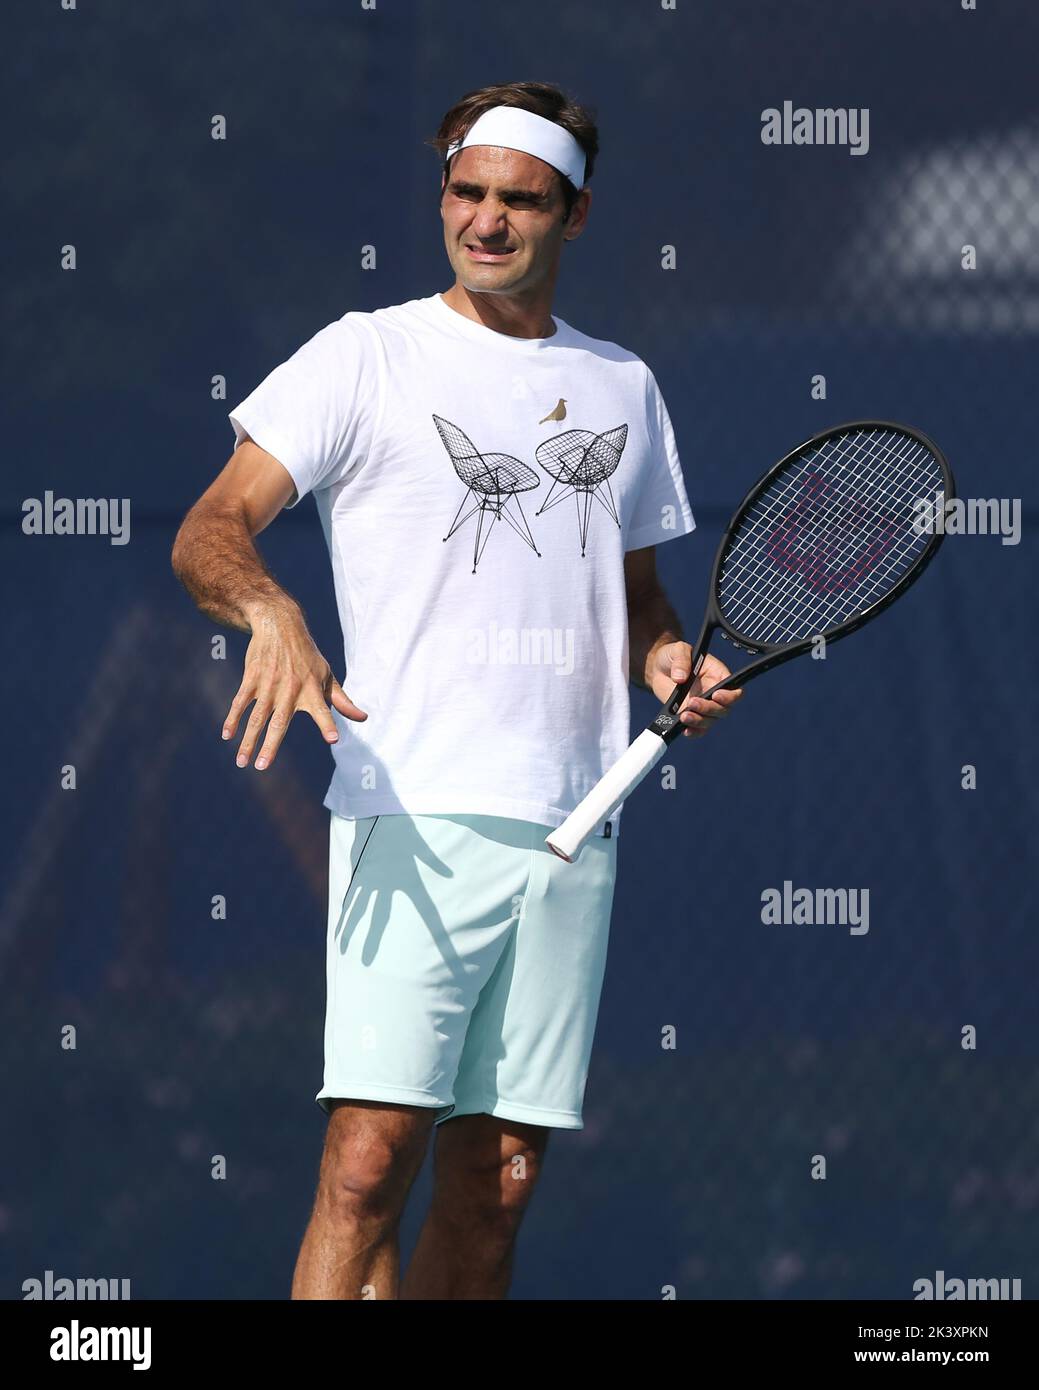 MIAMI GARDENS, FLORIDA - MARCH 29: Roger Federer of Switzerland prior to his match with Dennis Shapovalov of Canada in the semi finals of the Miami Open at the Hard Rock Stadium on March 29, 2019 in Miami Gardens, Florida. People: Roger Federer Credit: Storms Media Group/Alamy Live News Stock Photo